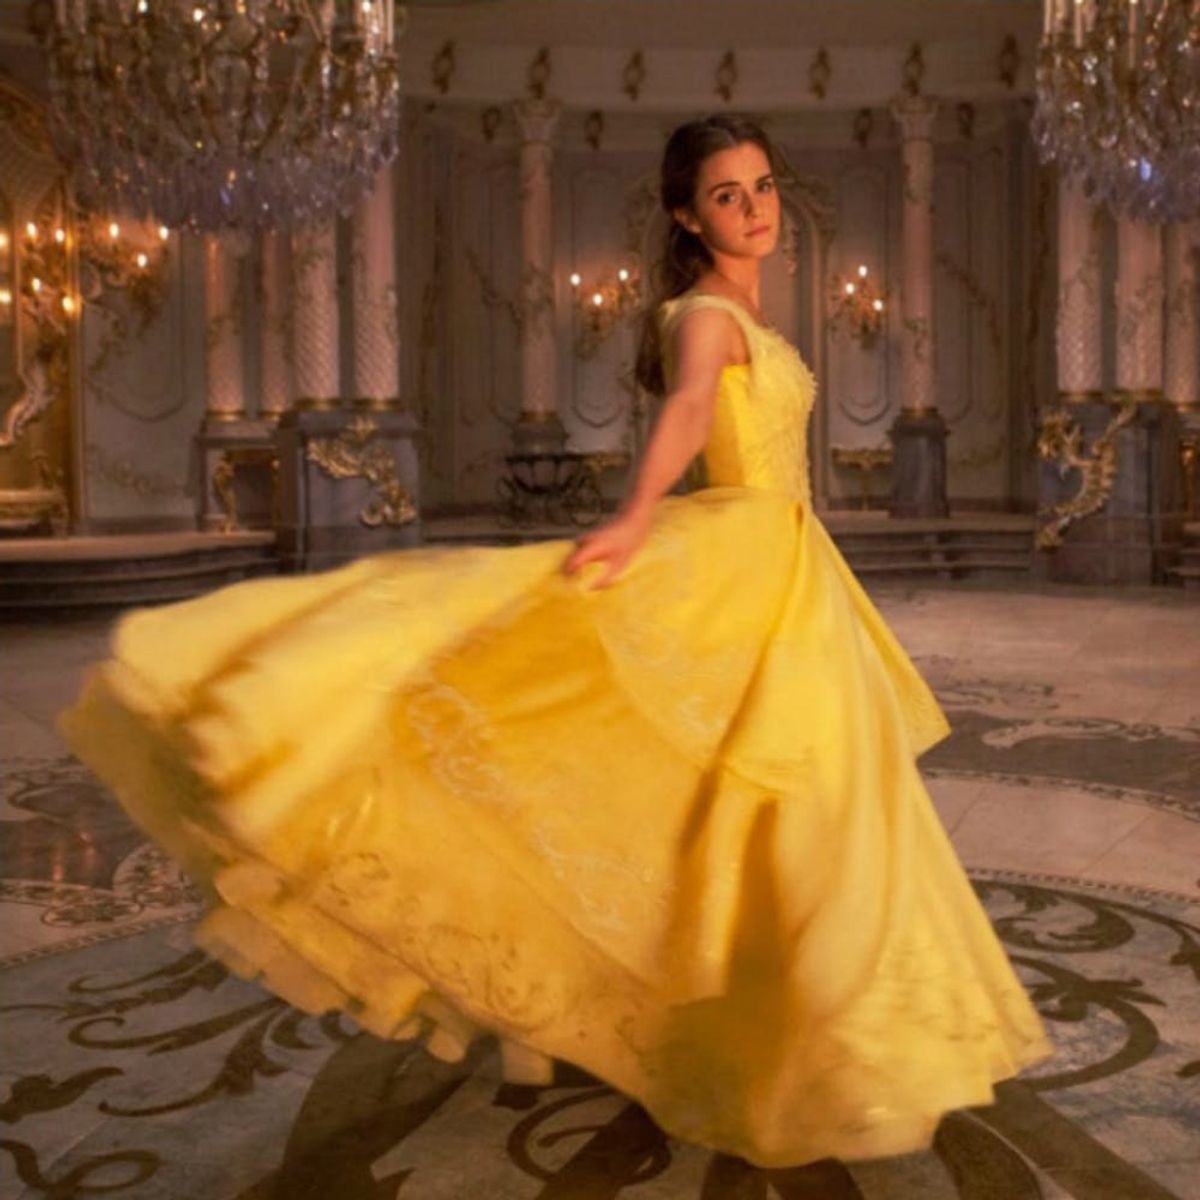 Emma Watson Just Revealed How She’s Giving Beauty and the Beast a Feminist Makeover